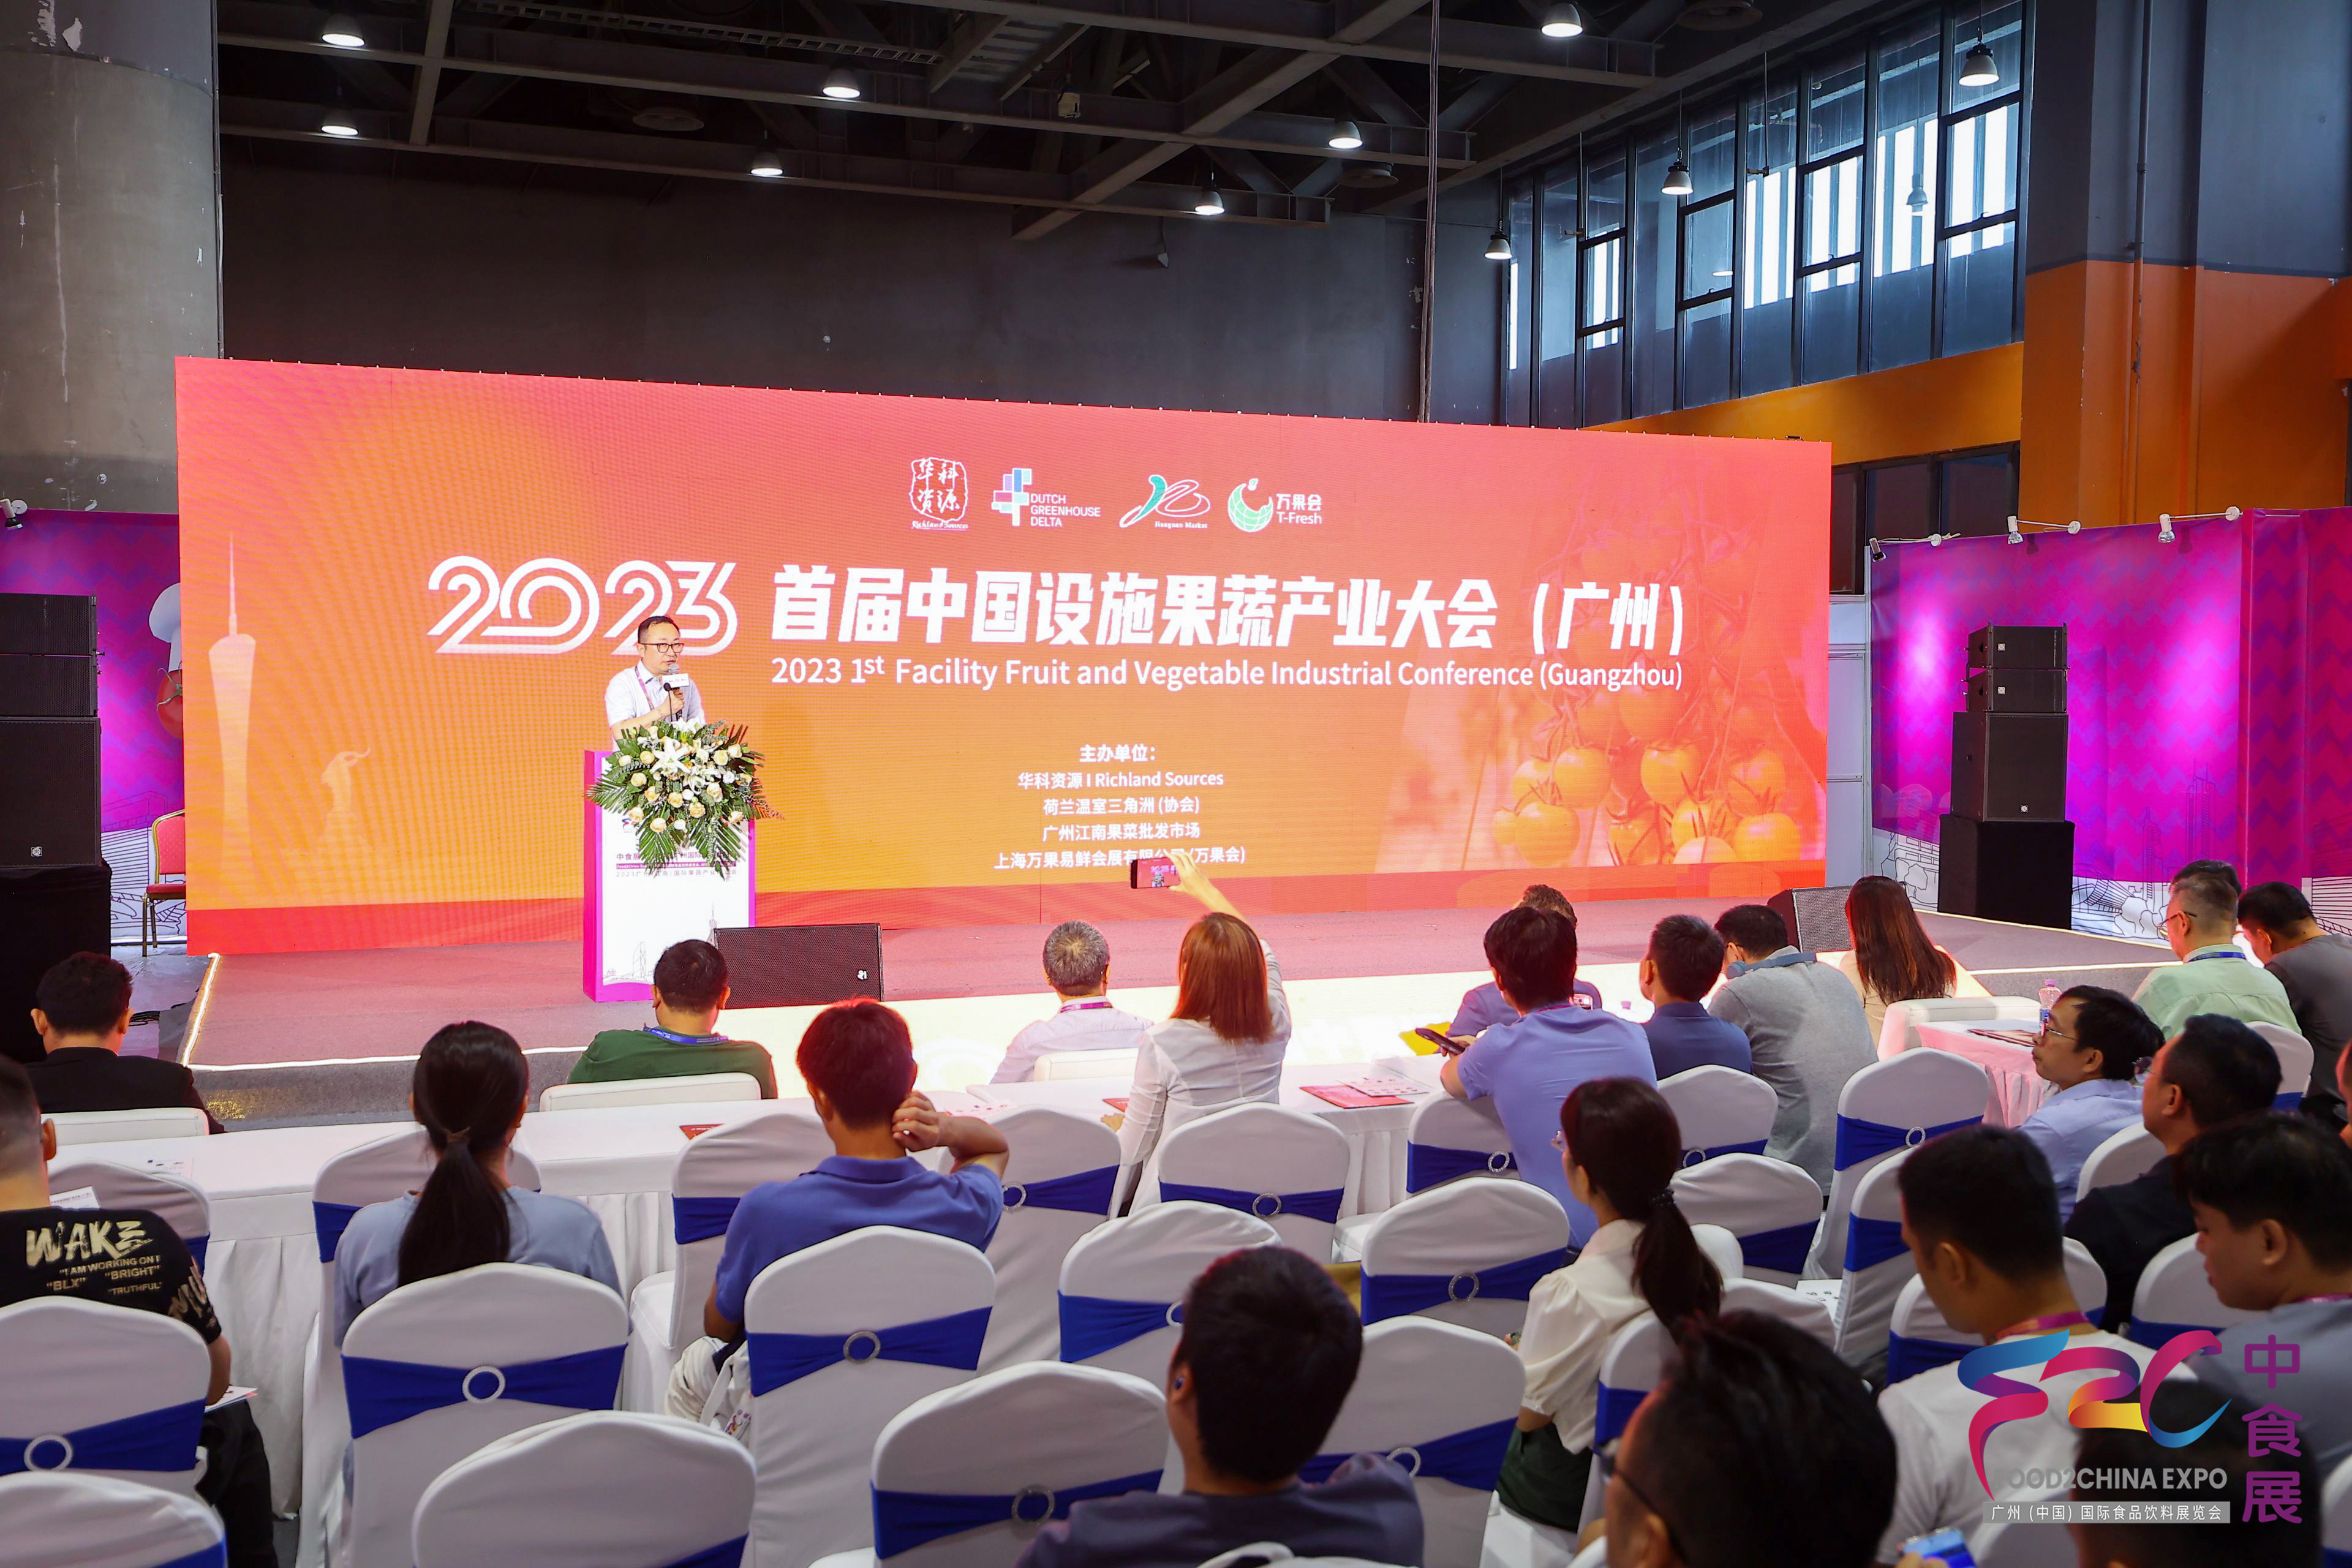 2023 First Facility Fruit and Vegetable Industrial Conference (GZ)